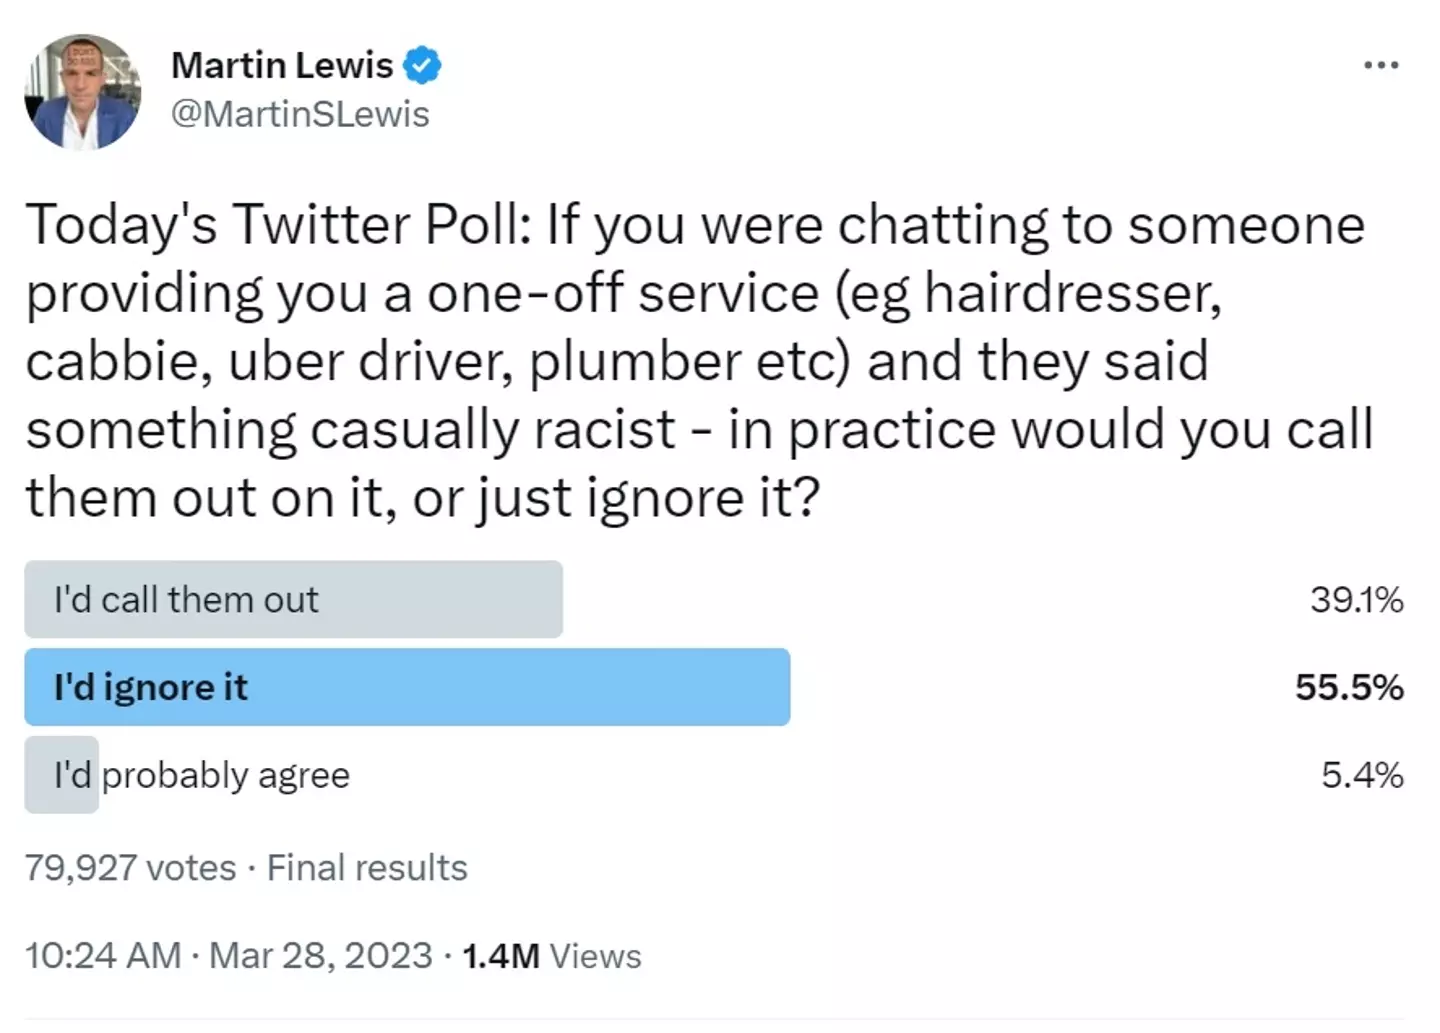 Martin Lewis polled his followers on Twitter, but was criticised for his use of language.